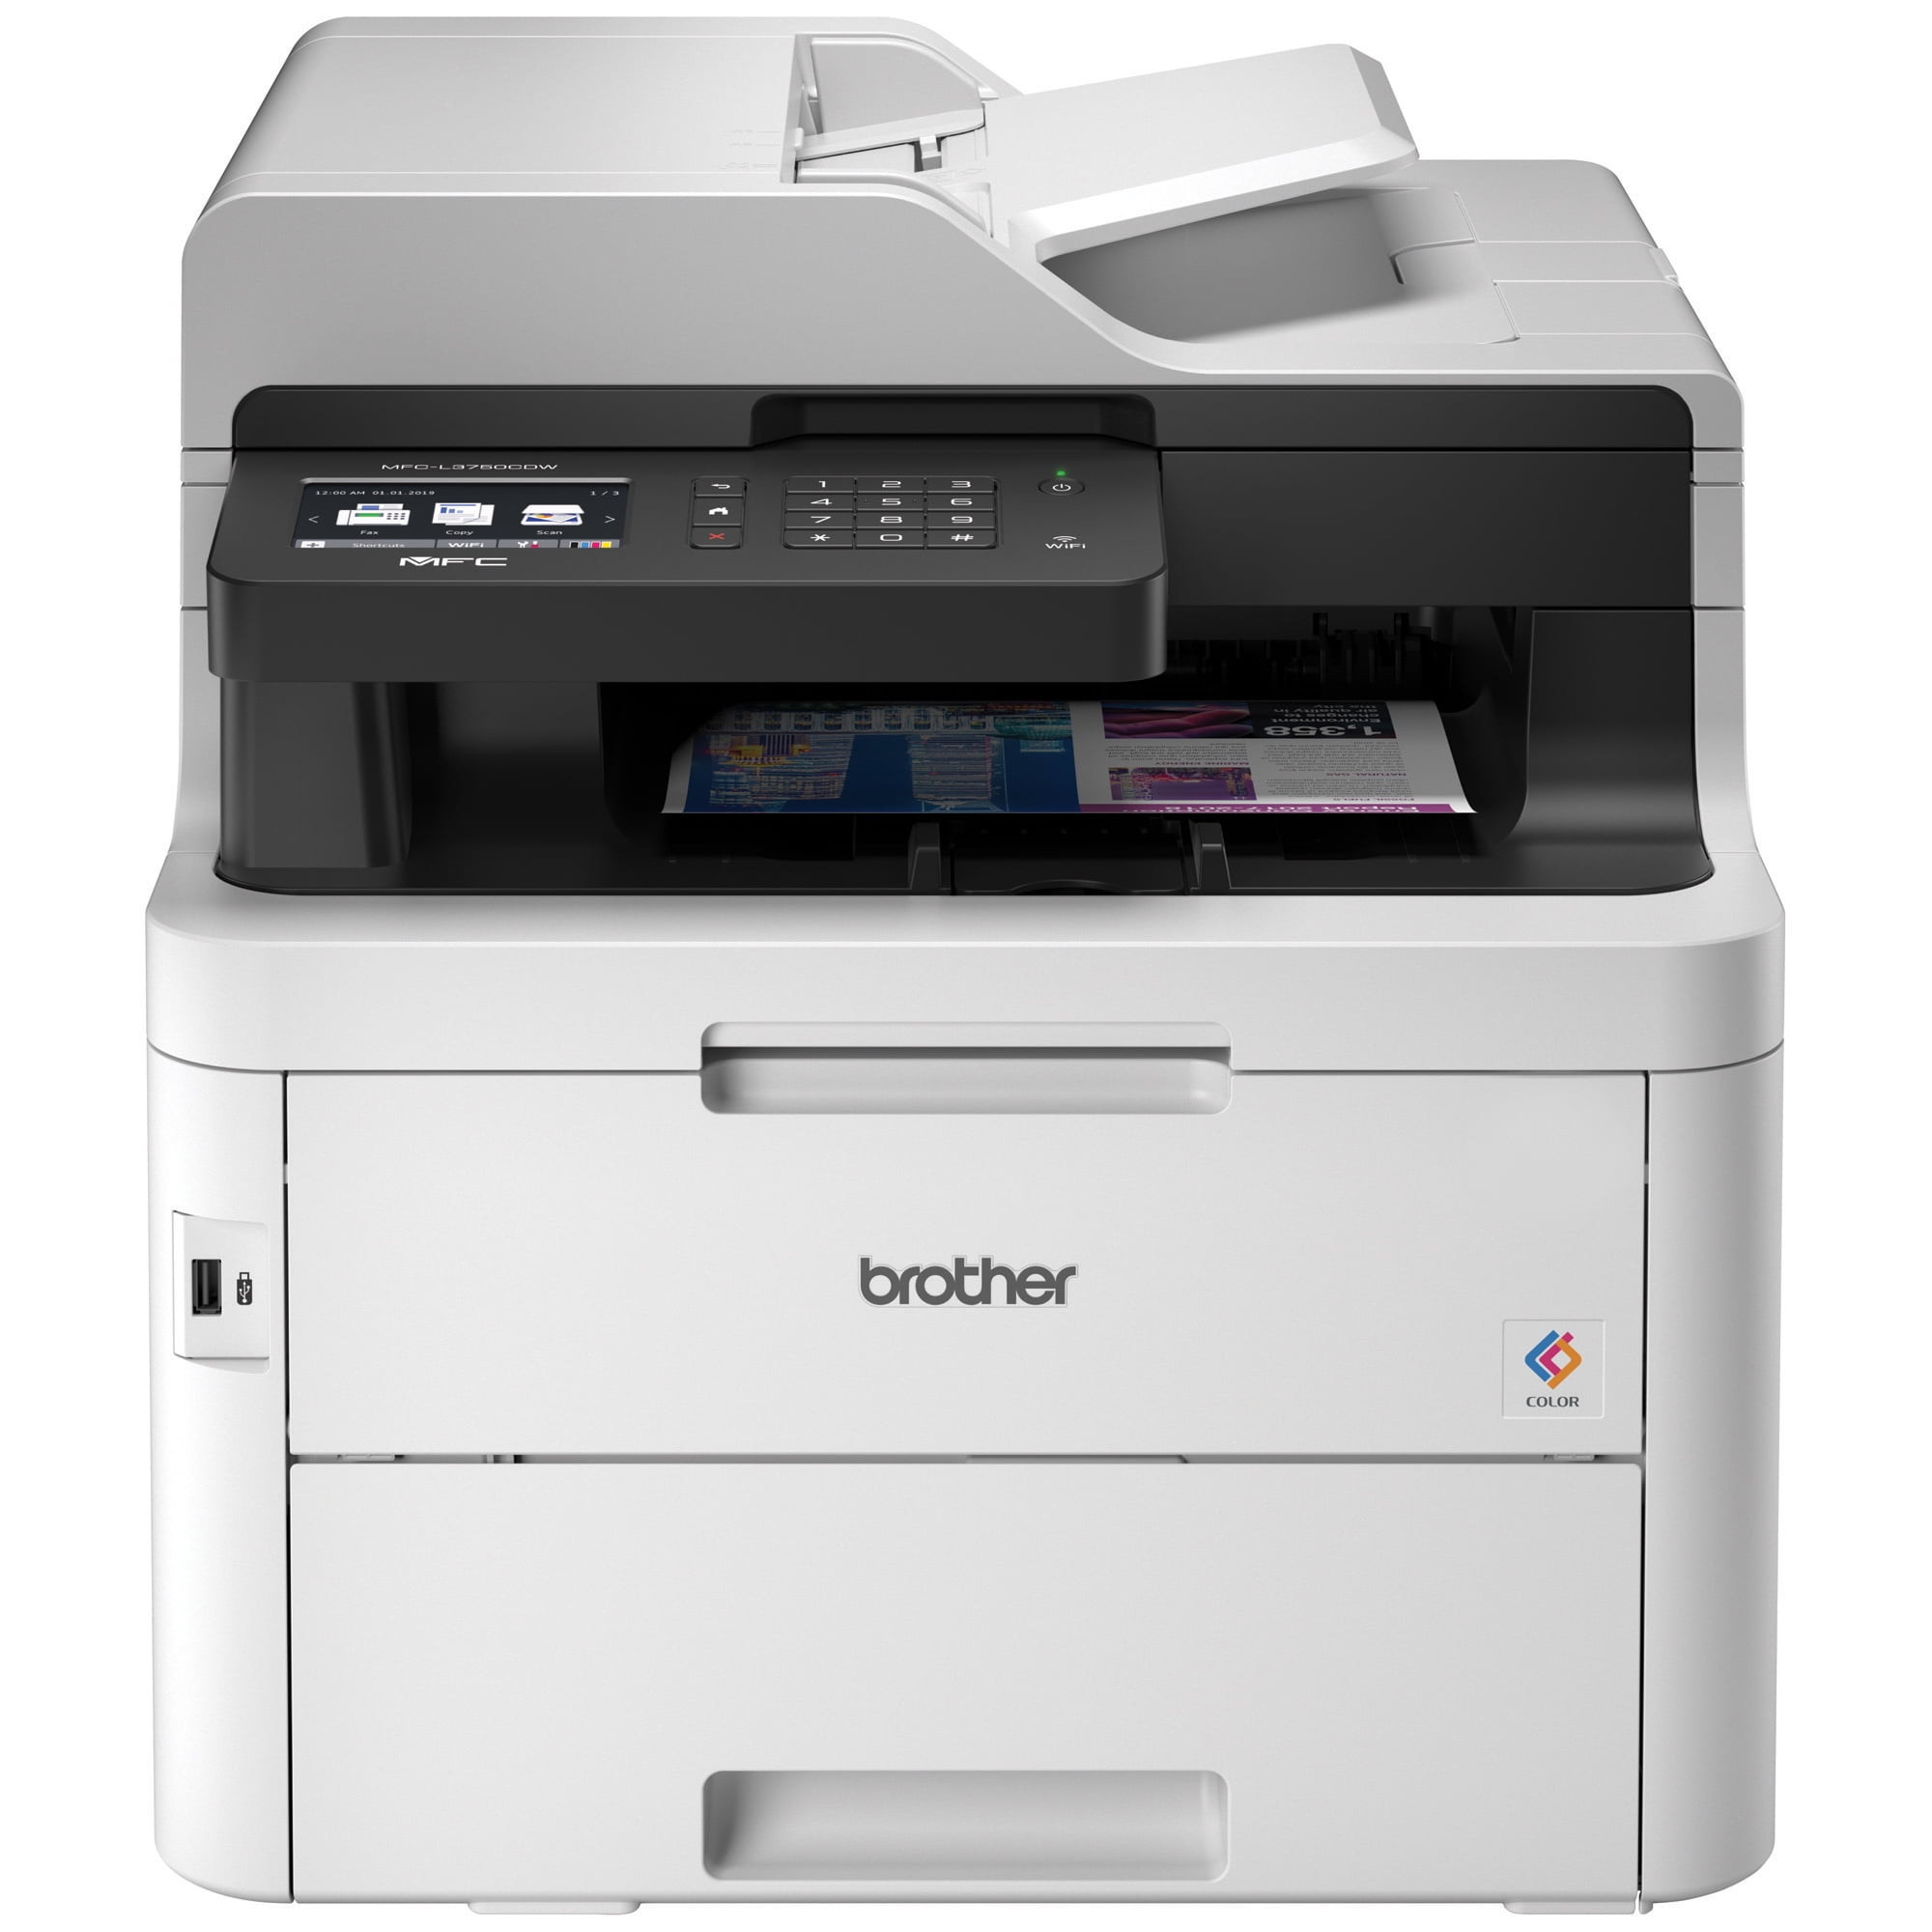 werknemer Verouderd Bevestigen Brother MFC-L3750CDW Compact Digital Color All-in-One Printer, 3.7” Color  Touchscreen, Wireless and Duplex Printing - Walmart.com